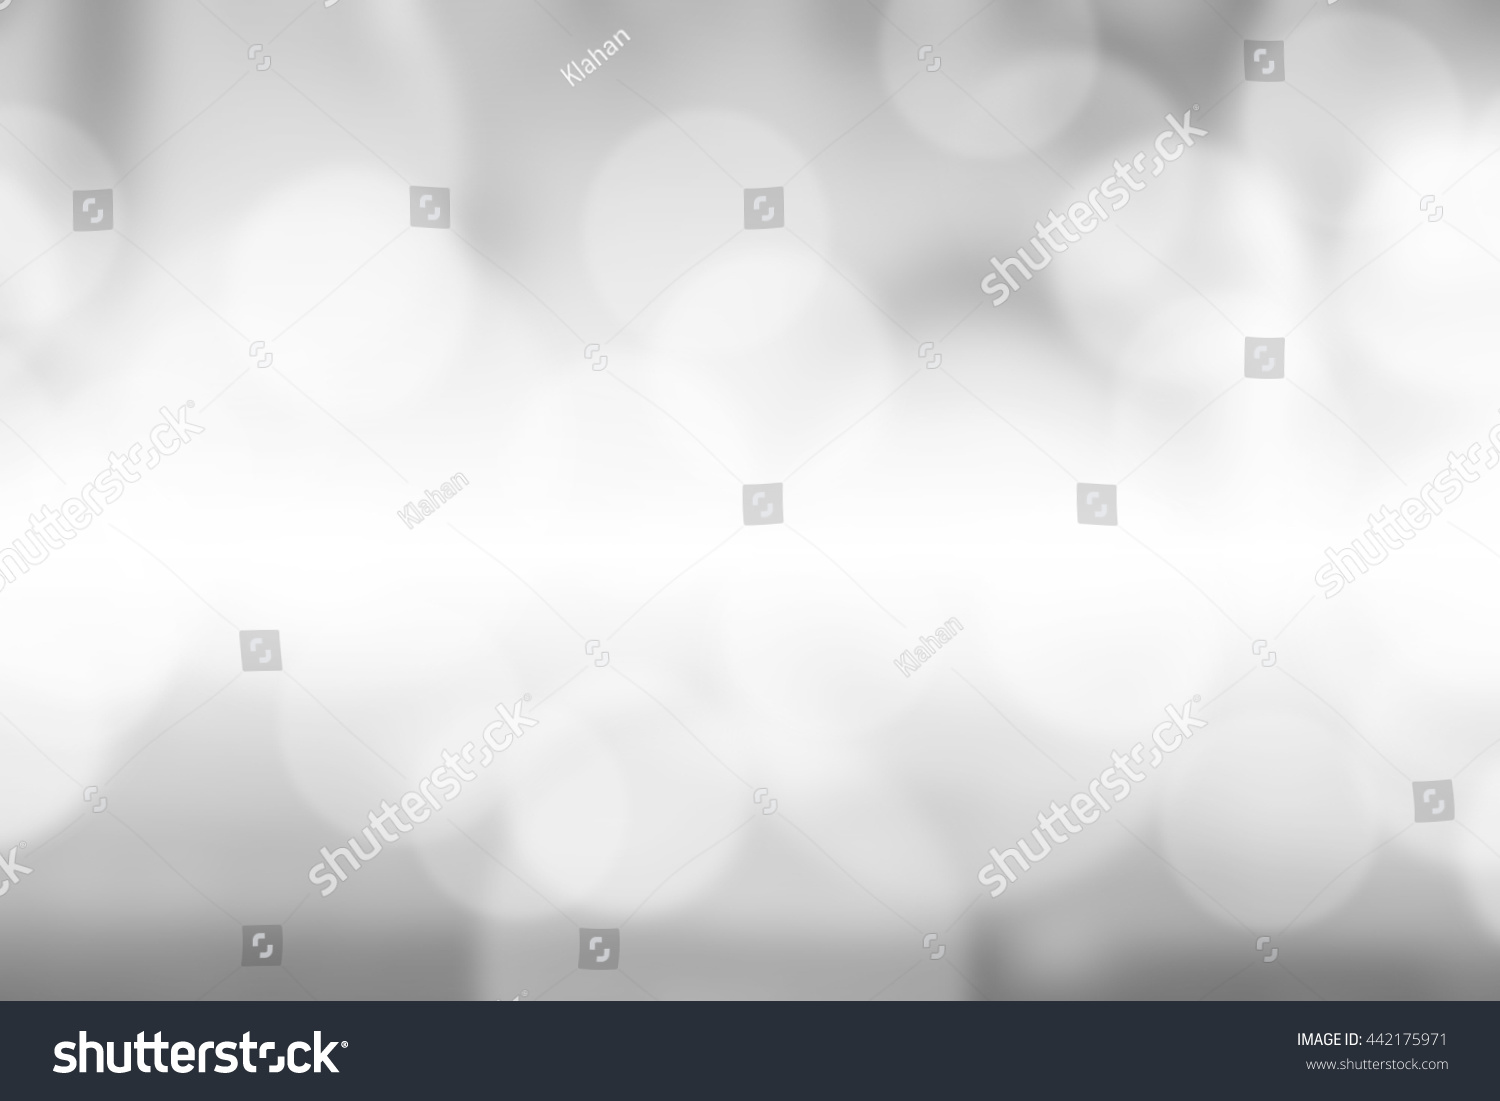 Grey Gradient Blurred Abstract Background.Gray Blurred Light Abstract